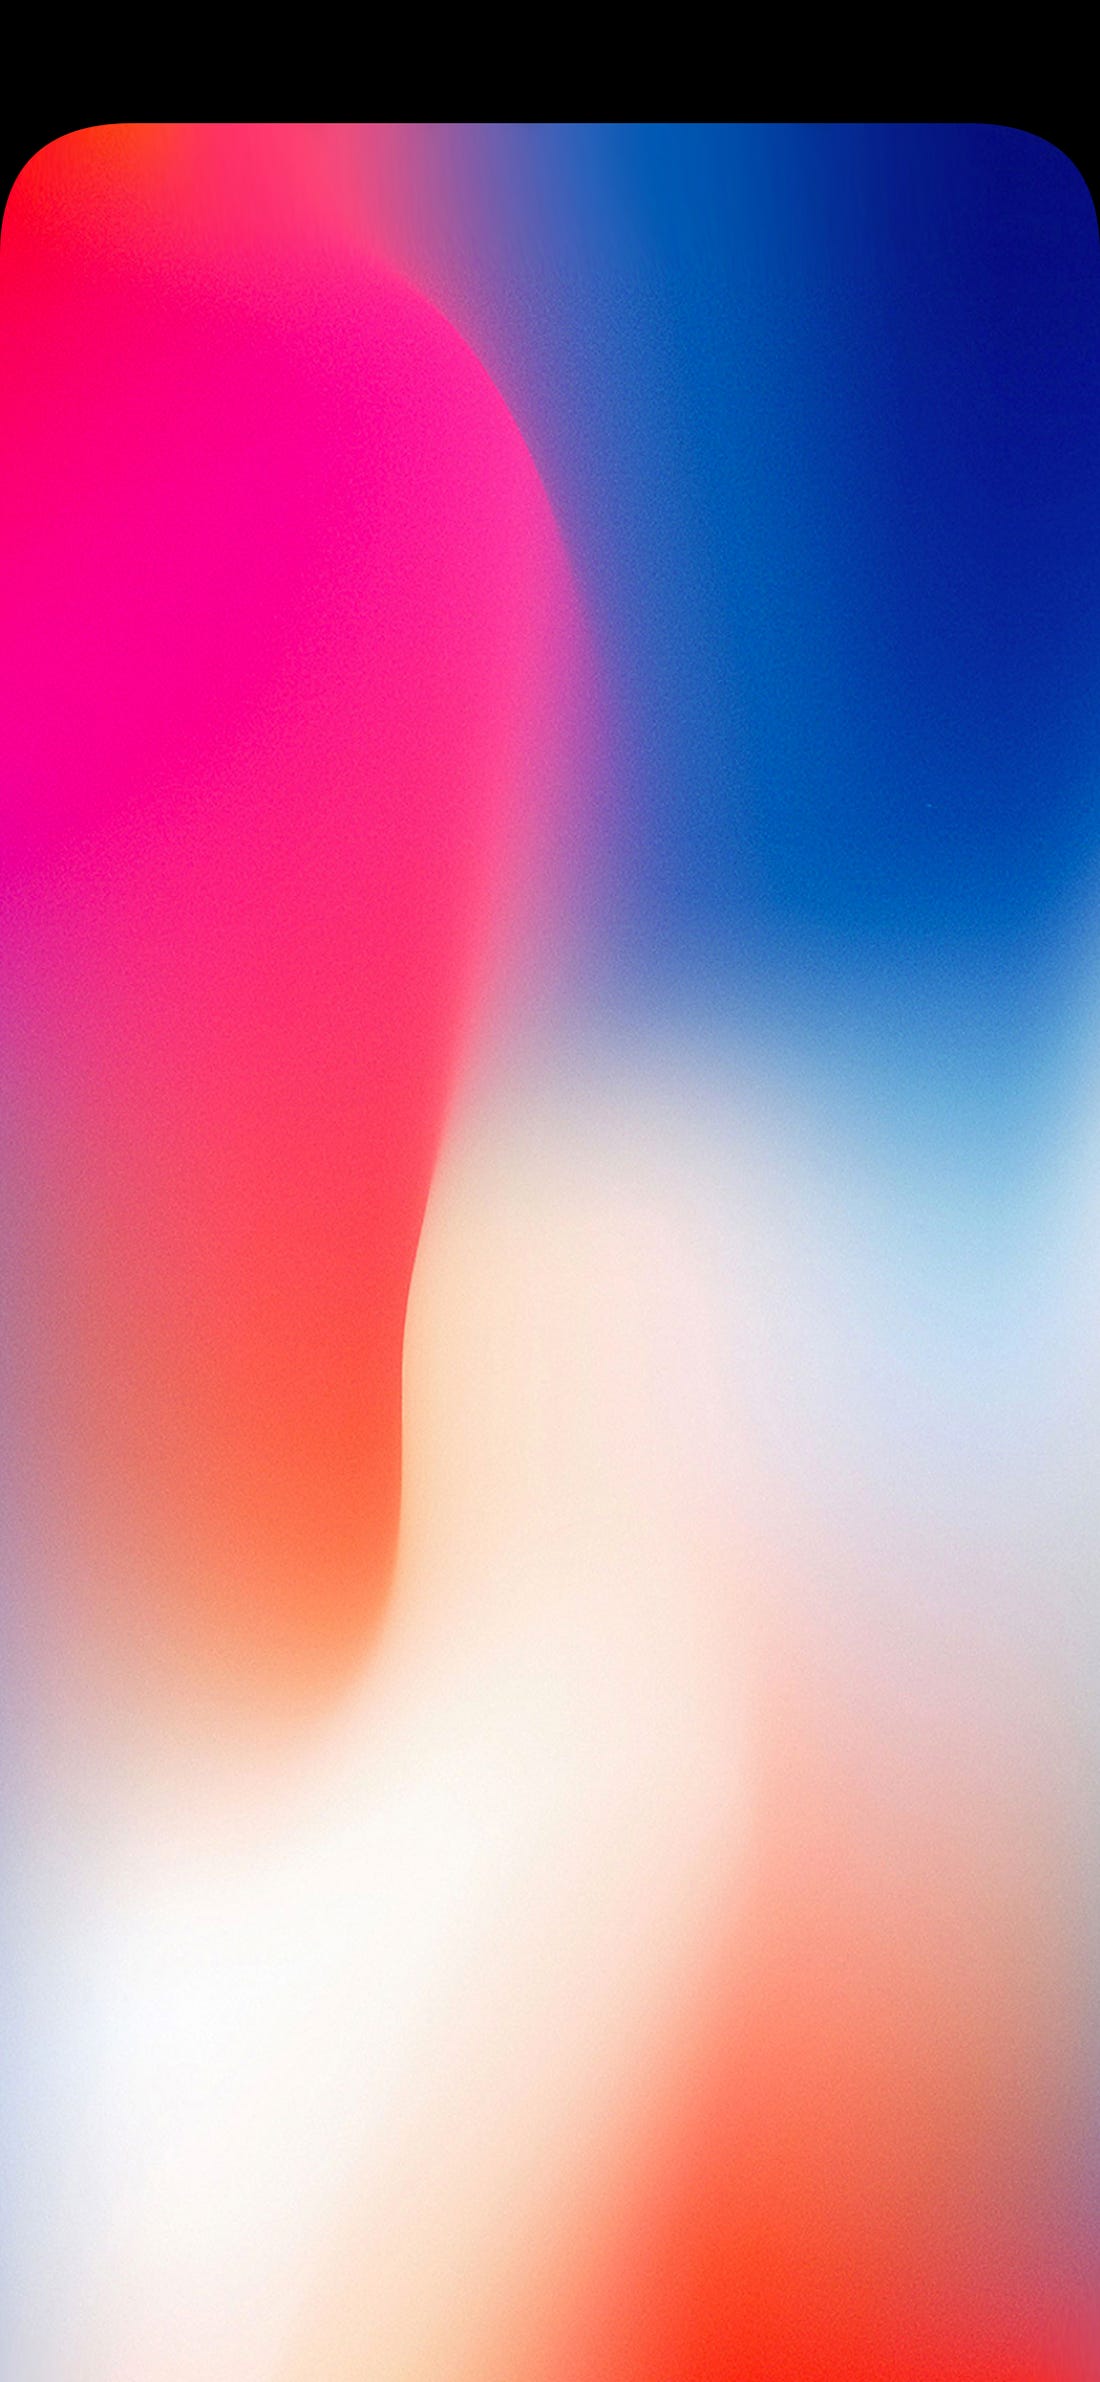 iPhone X wallpaper hides the notch